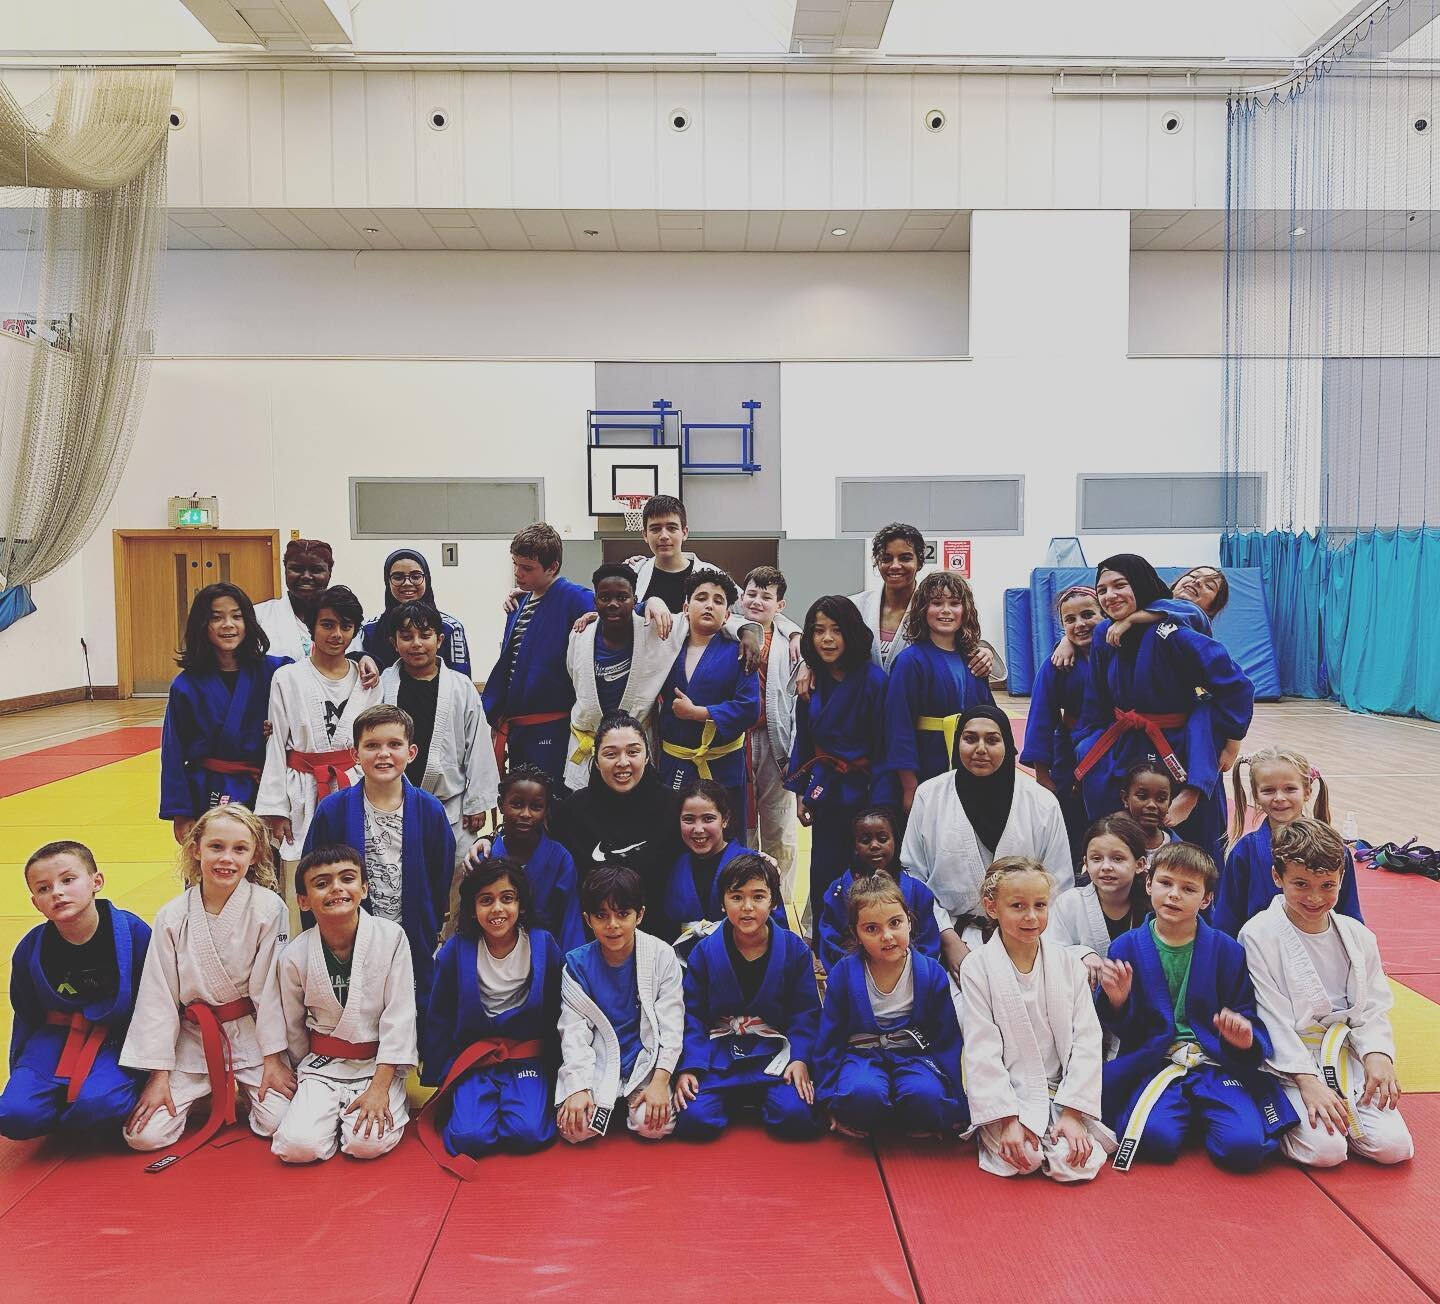 A1 Judo Club&rsquo;s October 2022 Judo Camp 🎃

These amazing kids worked so hard in preparation to their upcoming competitions, super proud of you all. It was a tough technical day 💪🏻🥋

#judo #jud&ocirc; #judokids #proudcoach #judotraining #judot